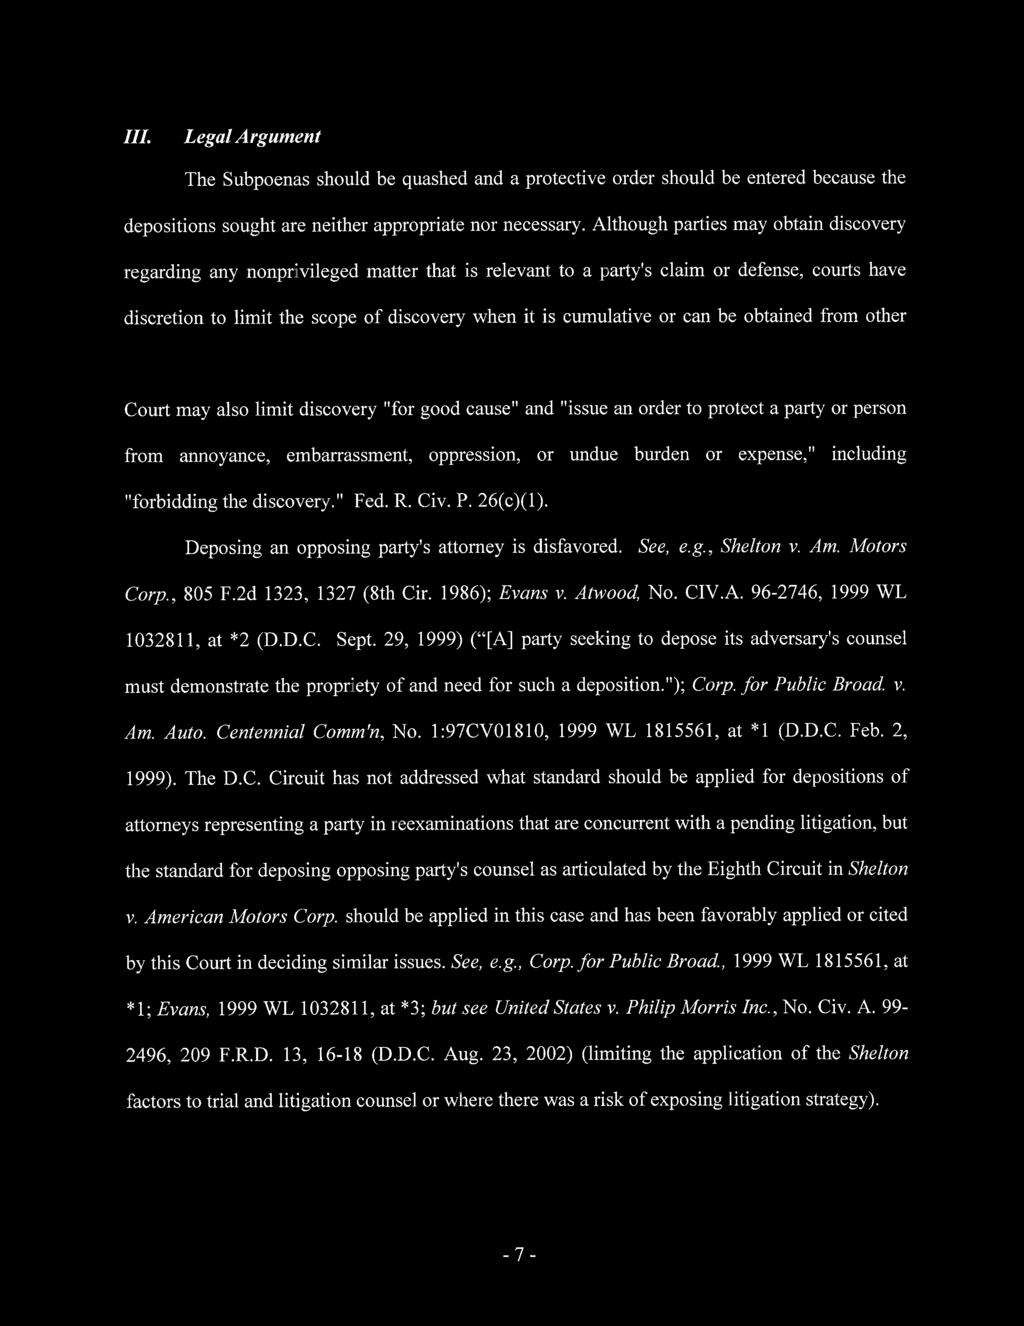 Case 1:11-mc-00295-RLW Document 1 Filed 05/17/11 Page 7 of 14 III.